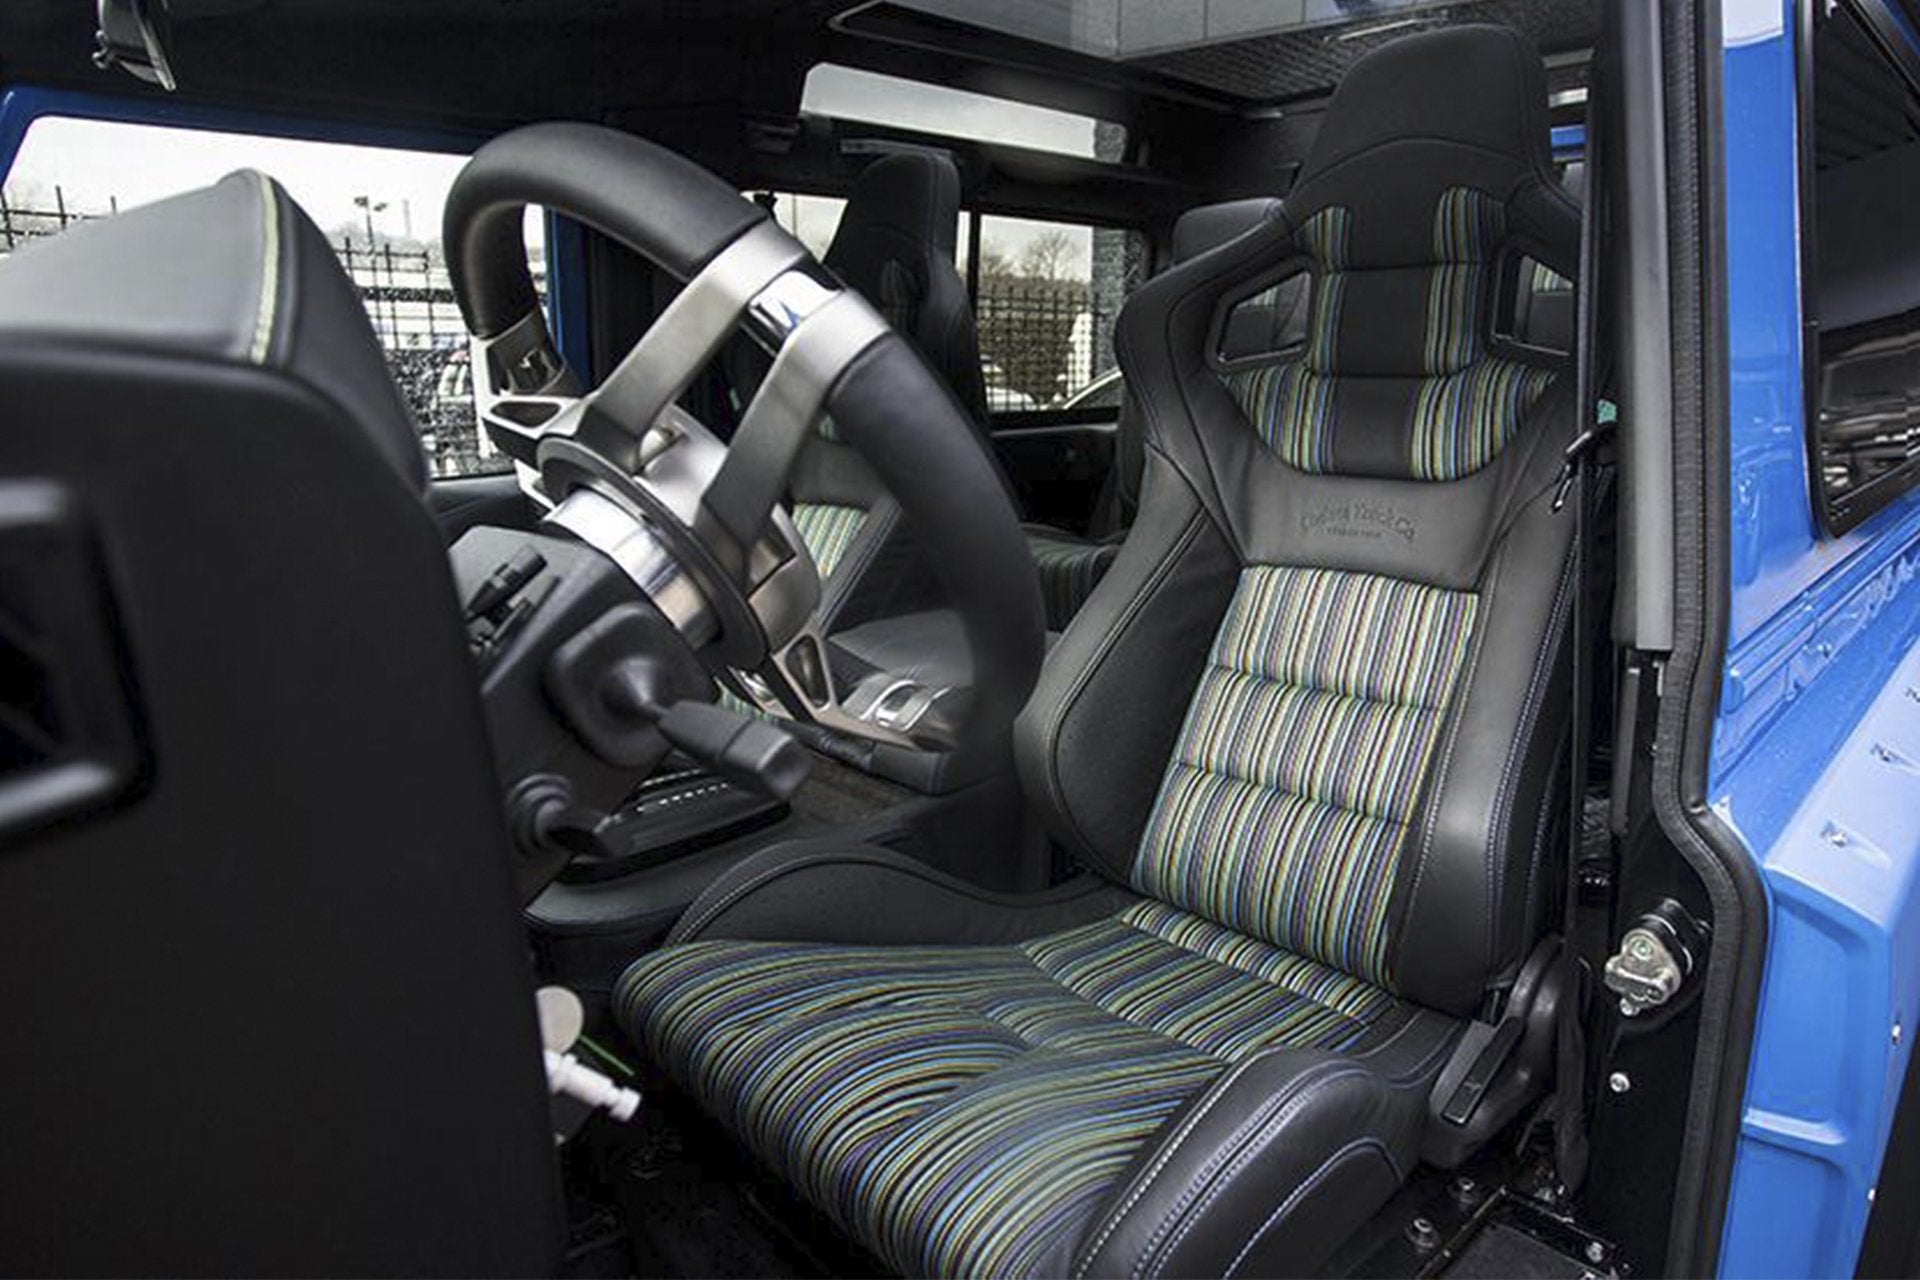 Land Rover Defender 90 (1991-2016) Leather Interior by Chelsea Truck Company - Image 1451